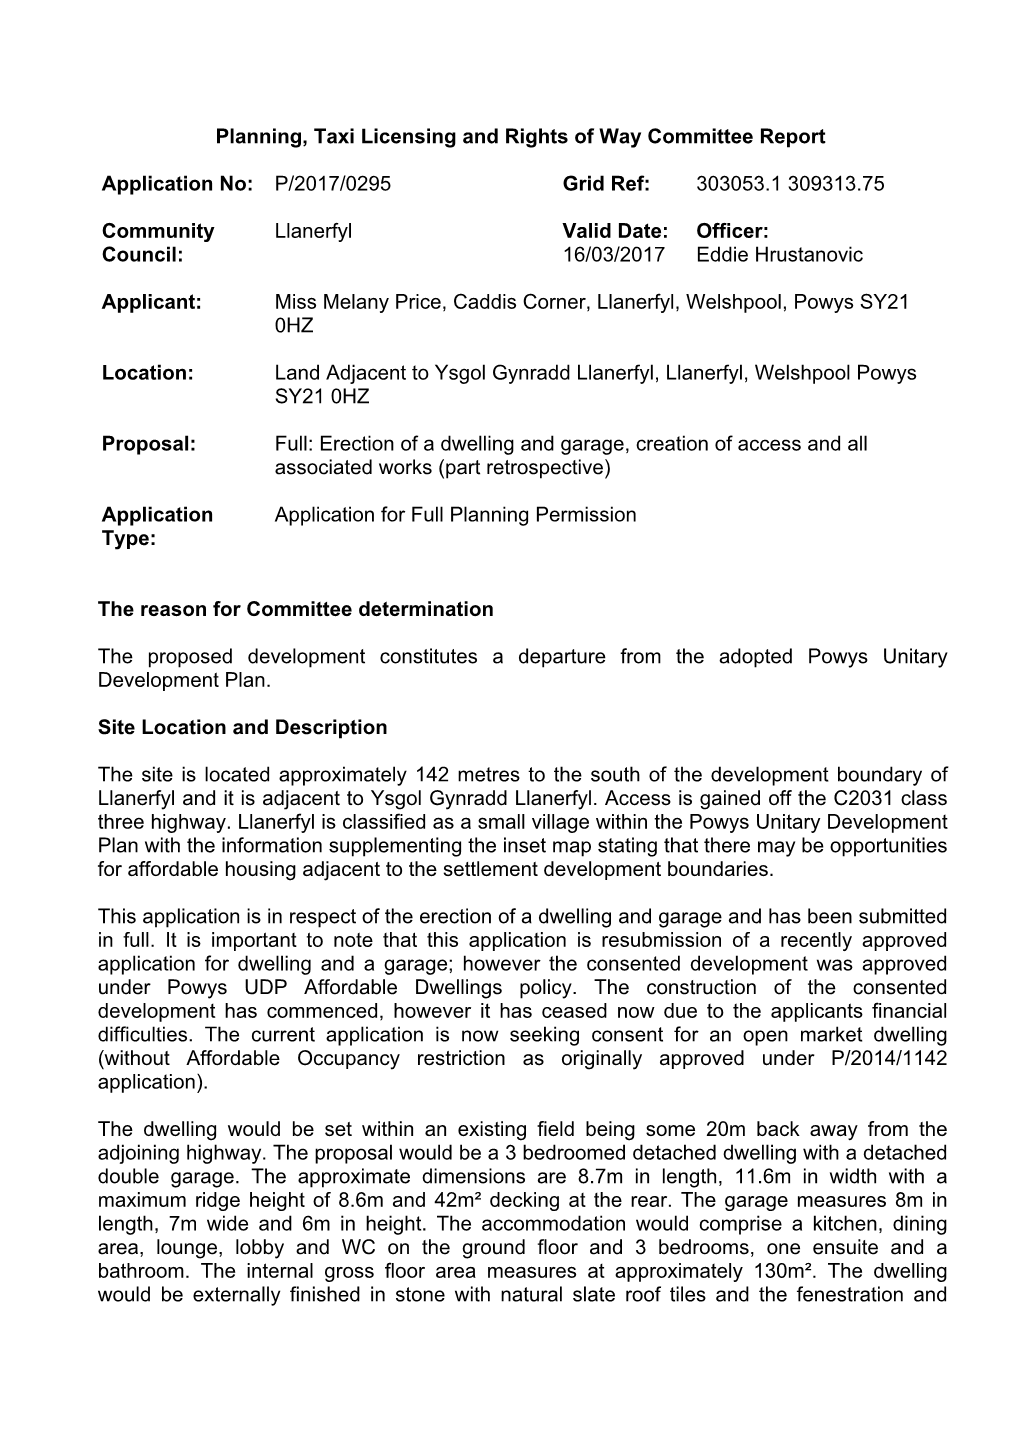 Planning, Taxi Licensing and Rights of Way Committee Report Application No: P/2017/0295 Grid Ref: 303053.1 309313.75 Community C